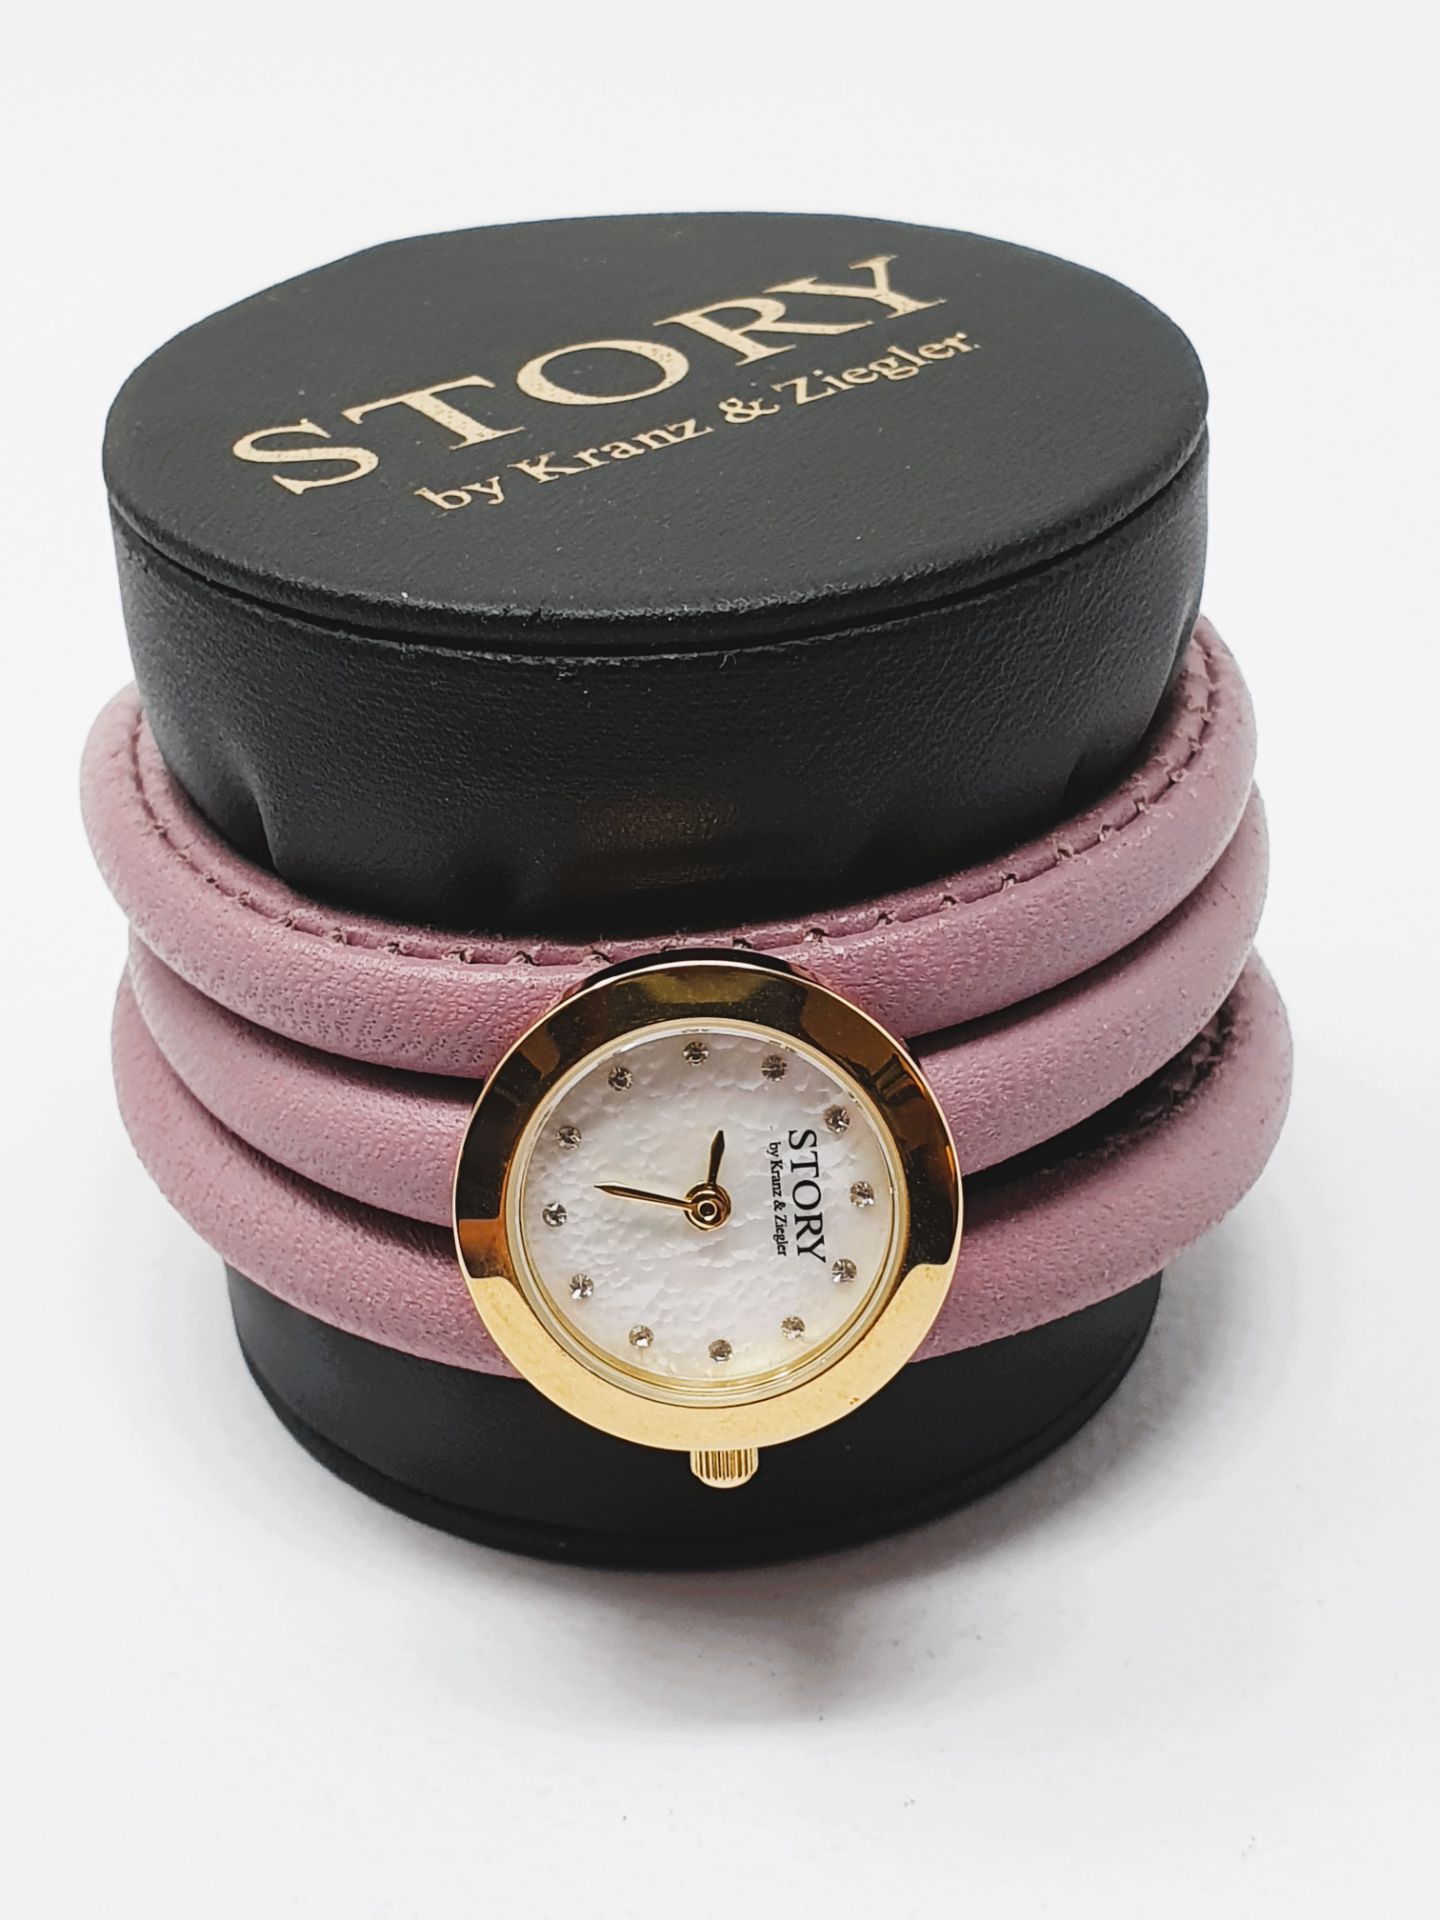 STORY' by Kranz & Ziegler lilac leather wrap bracelet with mother of pearl watch, unworn / boxed,